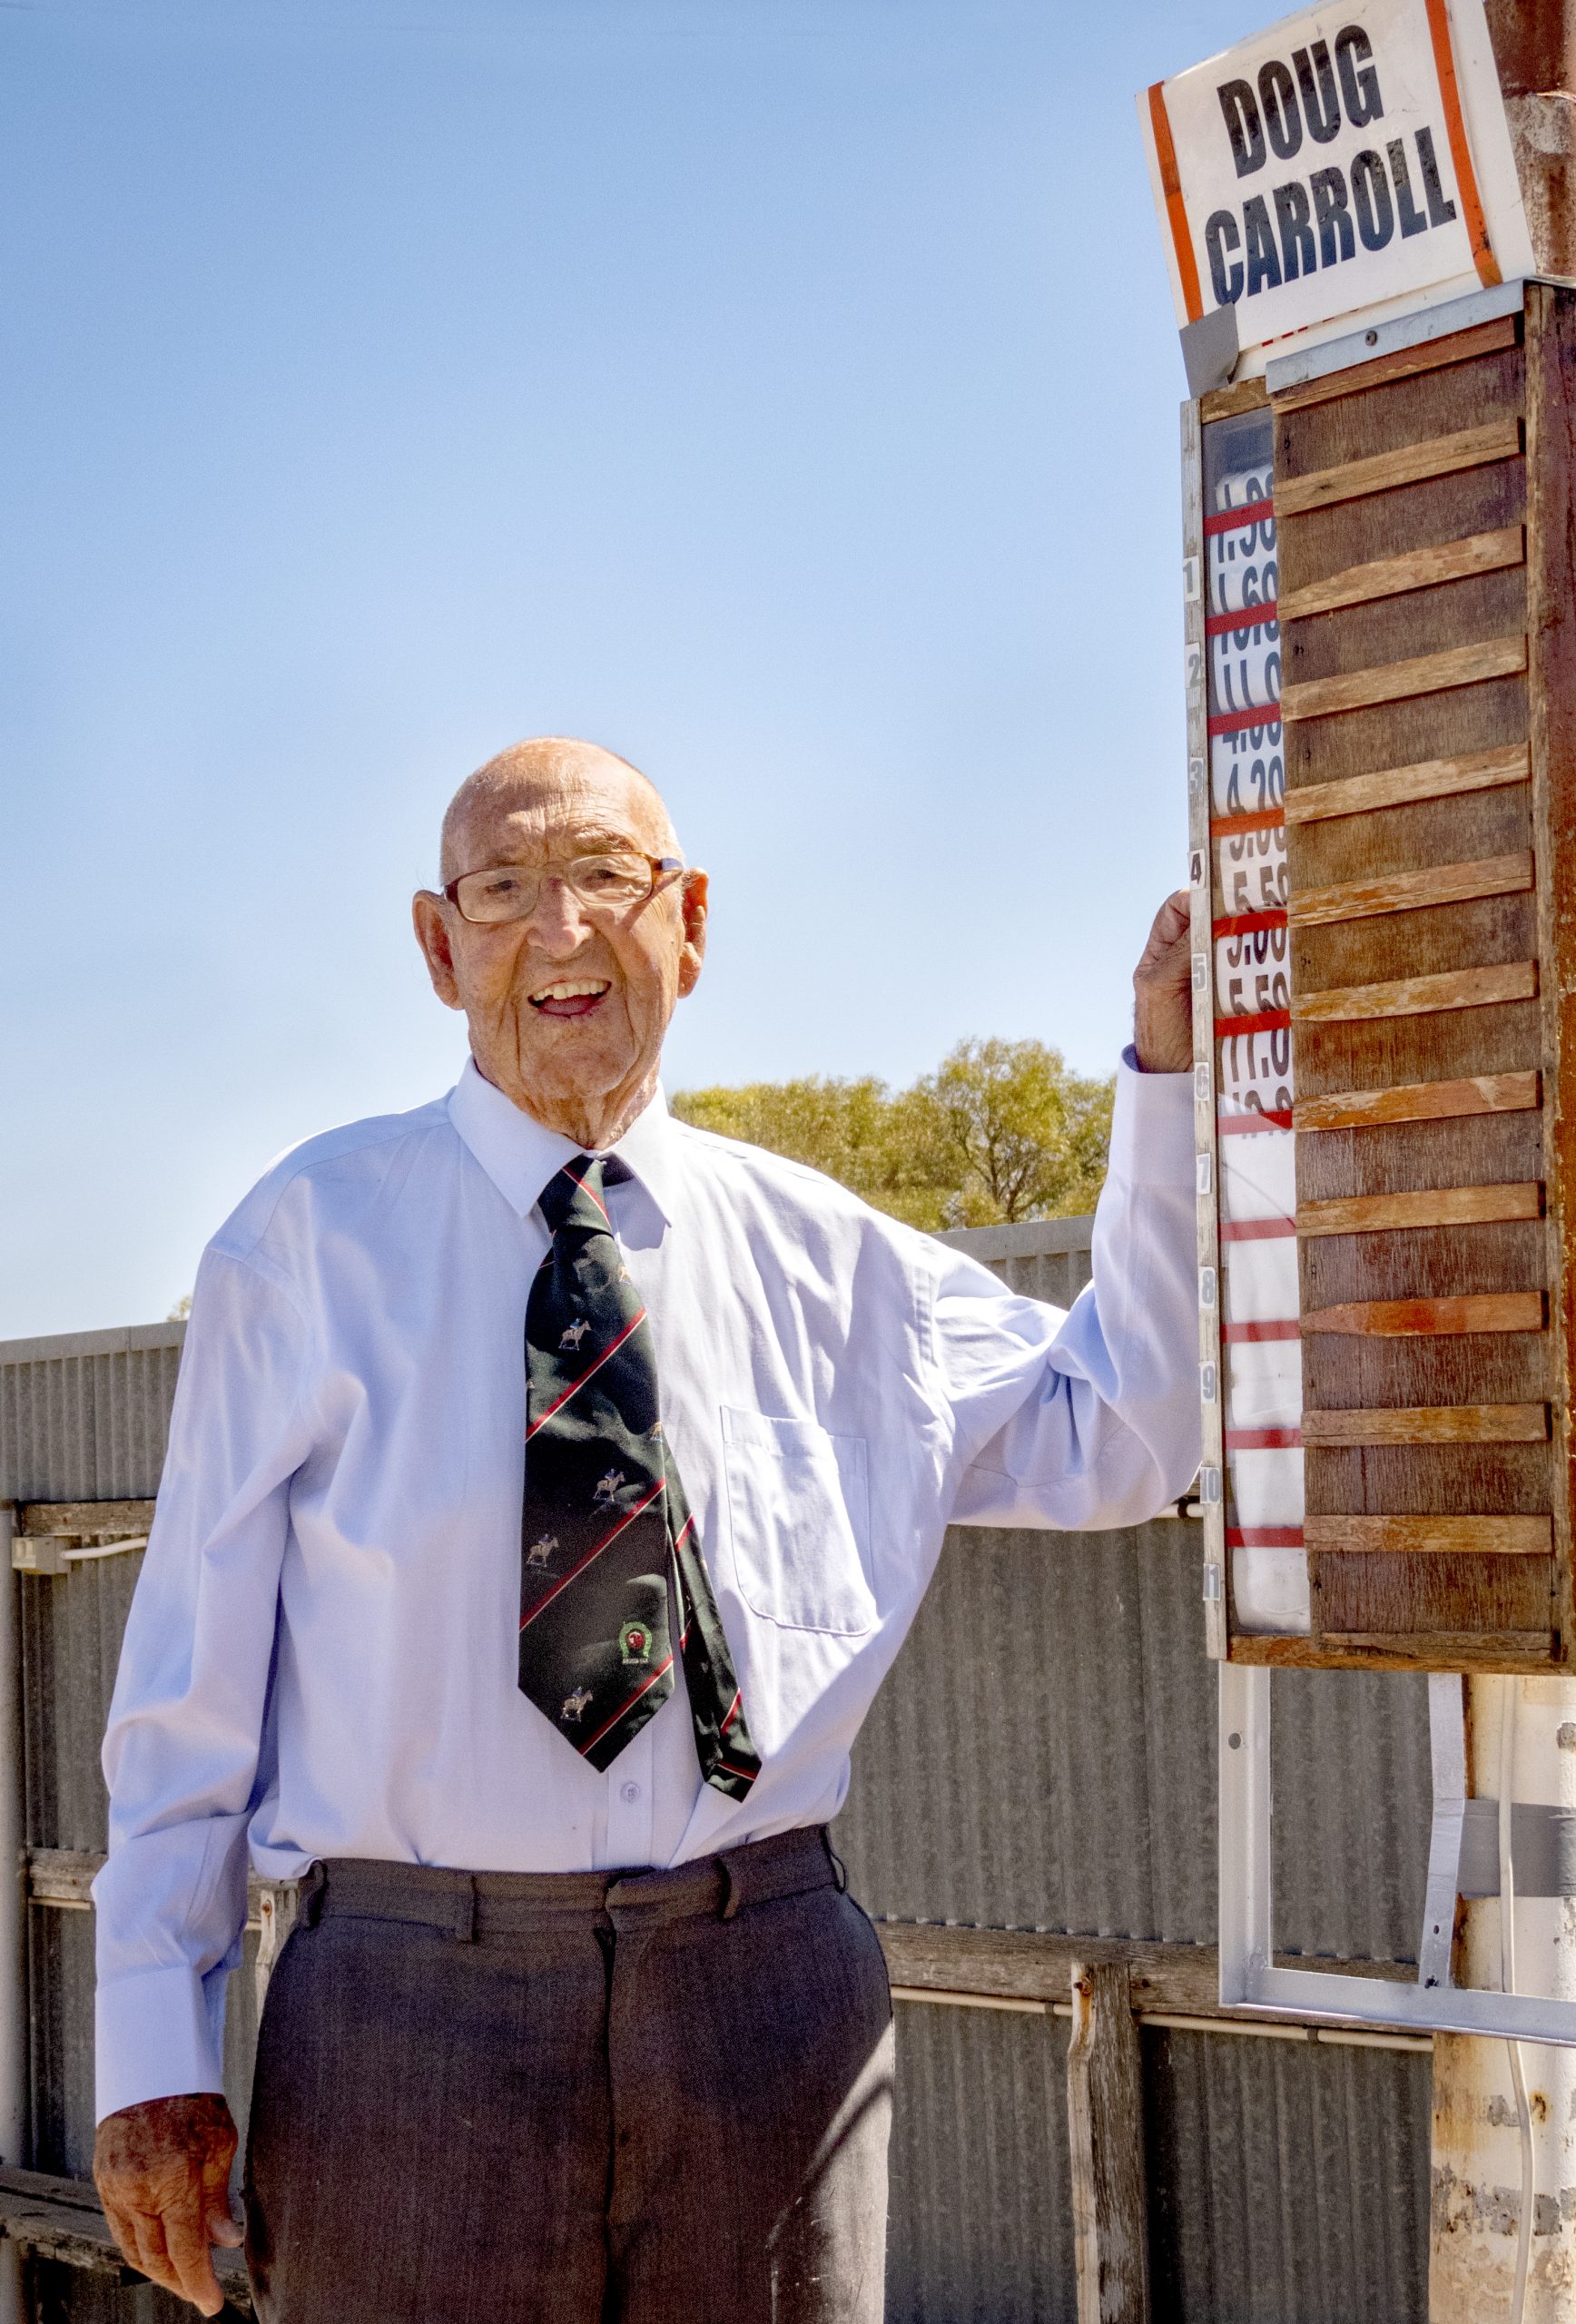 Local Doug Carrol, operating for 70 years, is the oldest bookie in the world. PICTURE: EVE-LYN KENNEDY